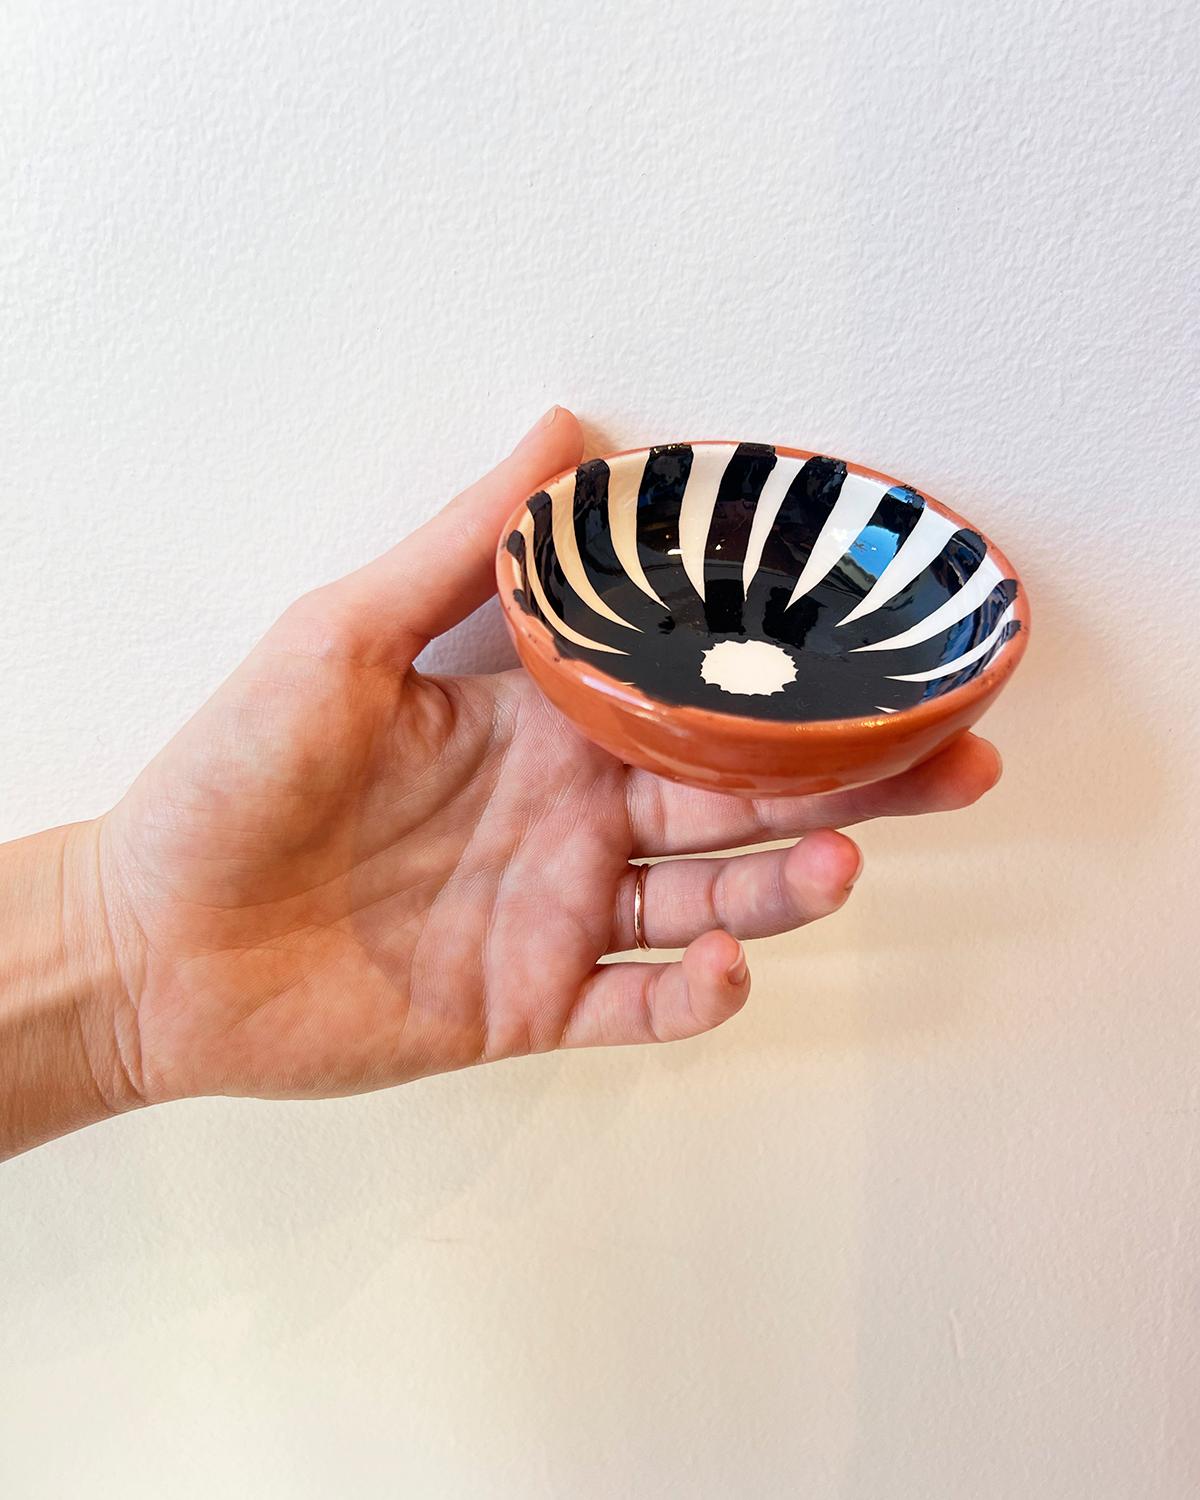 Small Bowls with Bold Graphic Patterns

These mini bowls are perfect to use as a salt or pepper bowls. We also love to use them for dipping sauces or fresh or dried herbs and spices. A little bowl like this can add a lot of charm to a table and